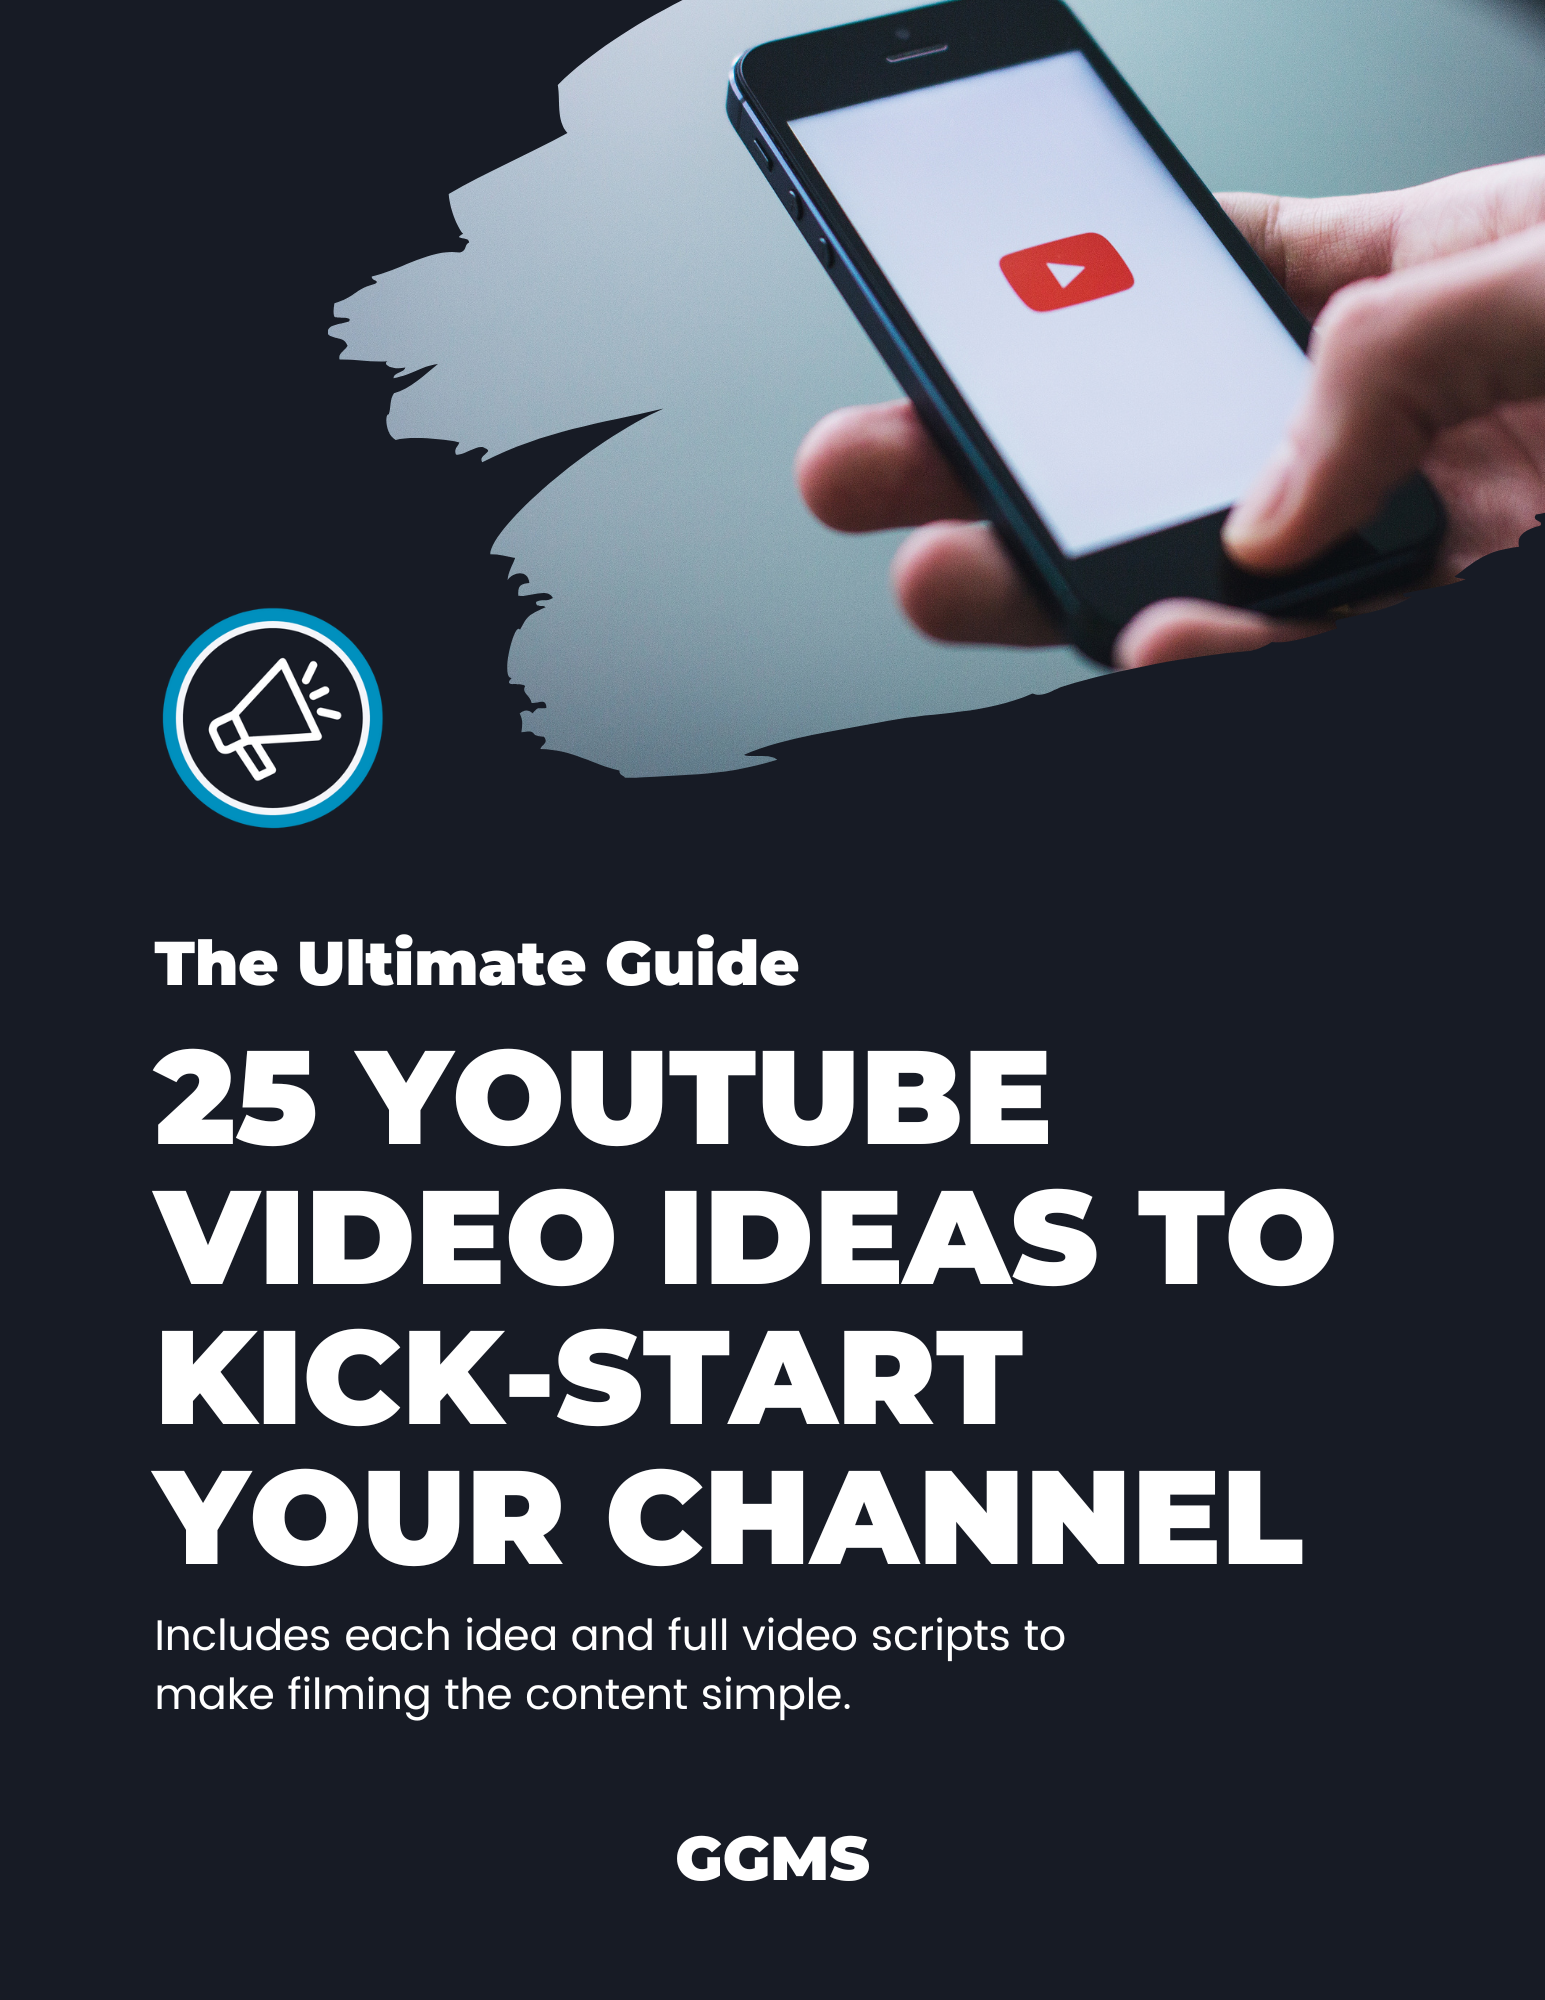 GGMS - The Ultimate Guide 25 YouTube Video Ideas to Kick-start your Channel